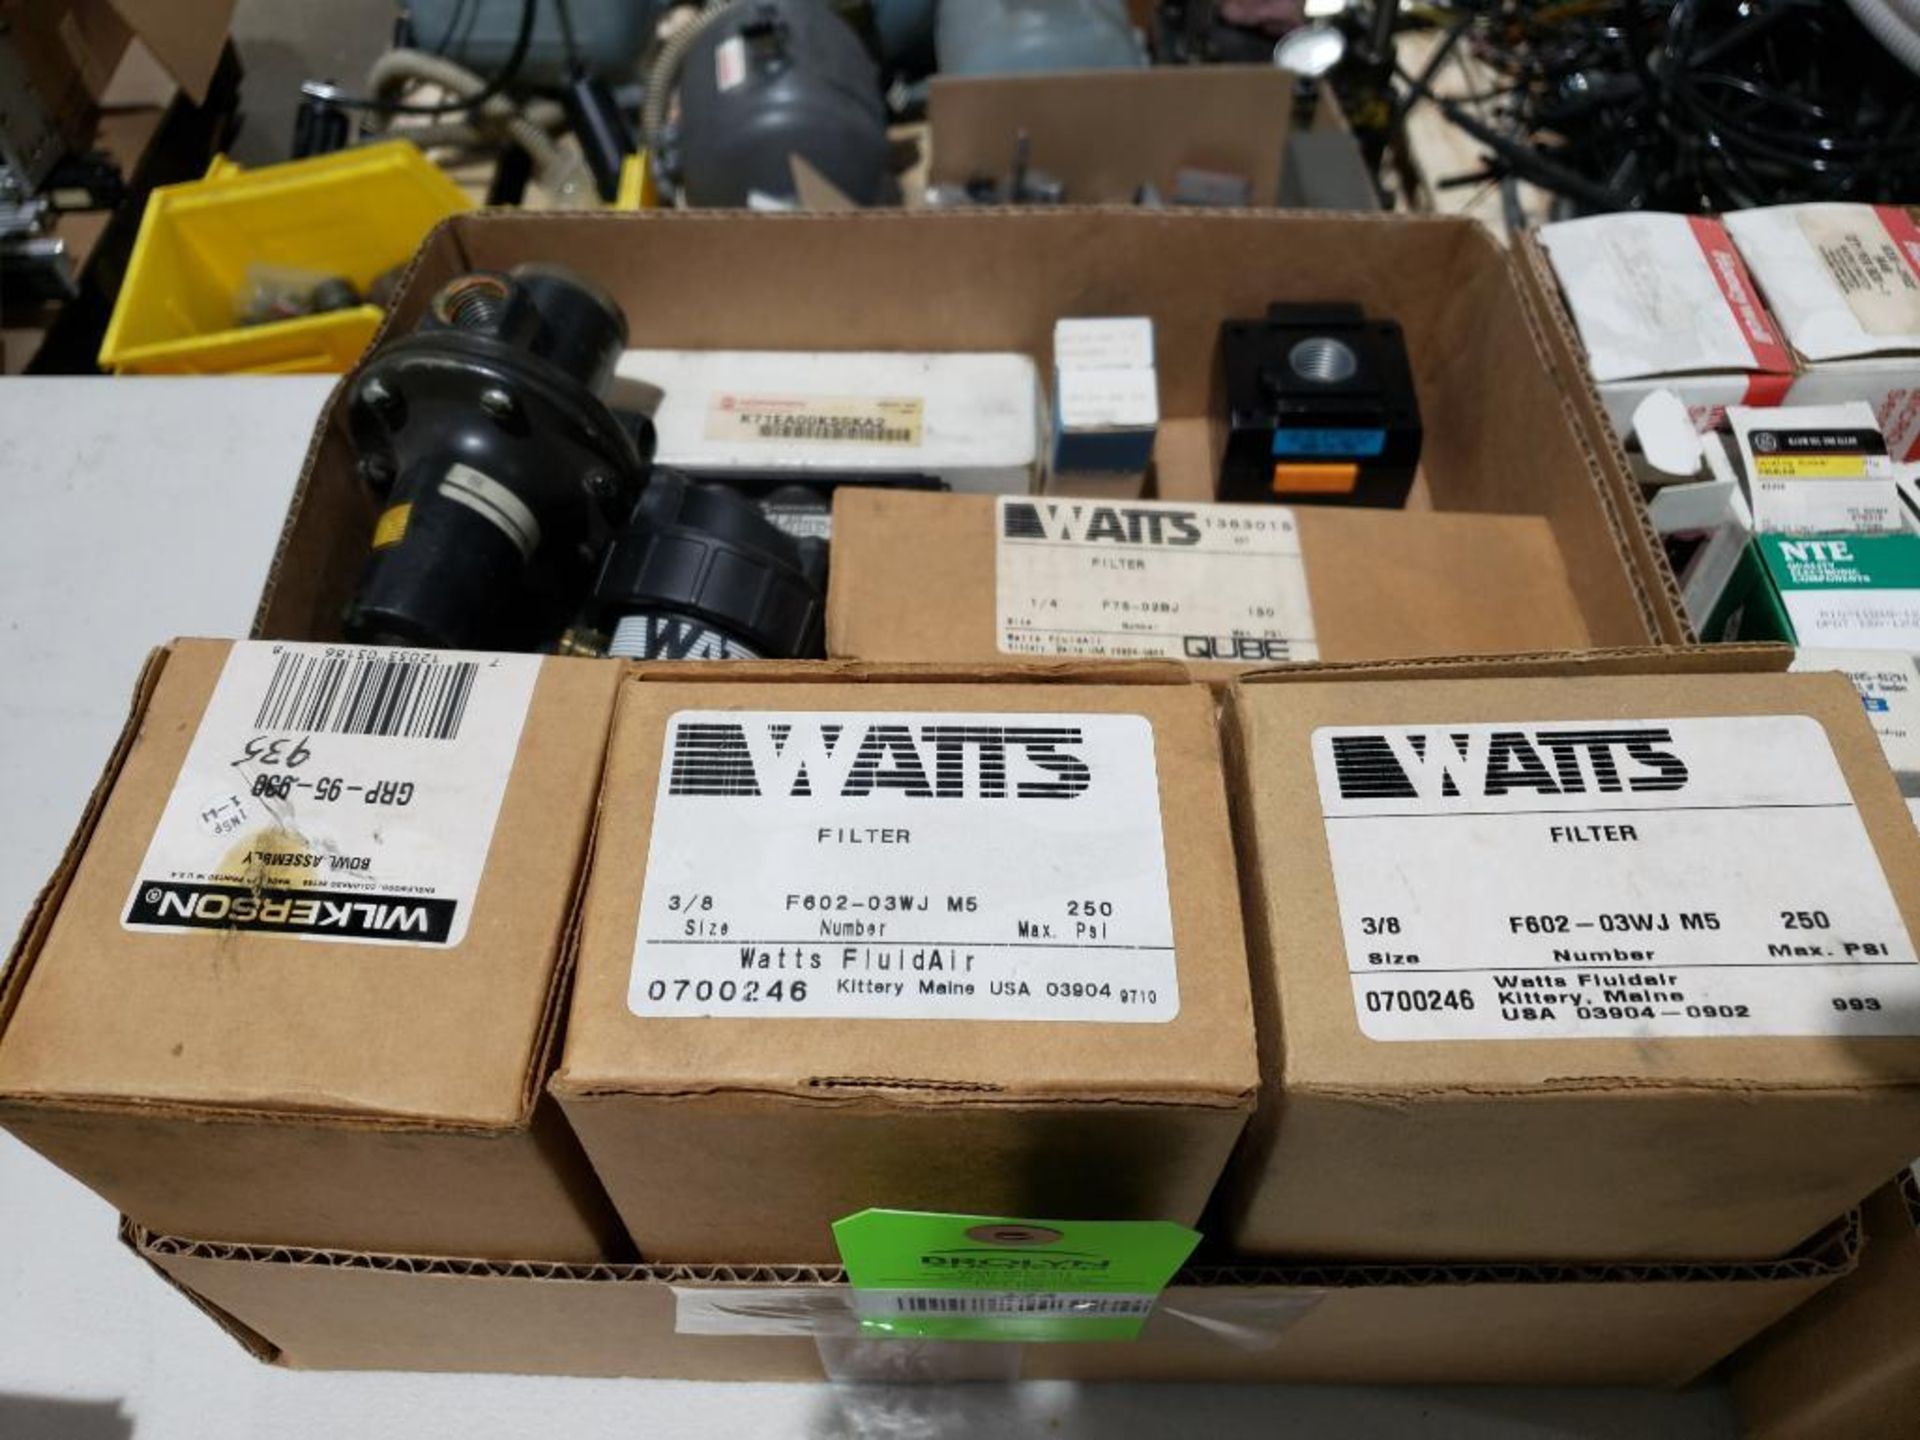 Assorted Watts pneumatic components.